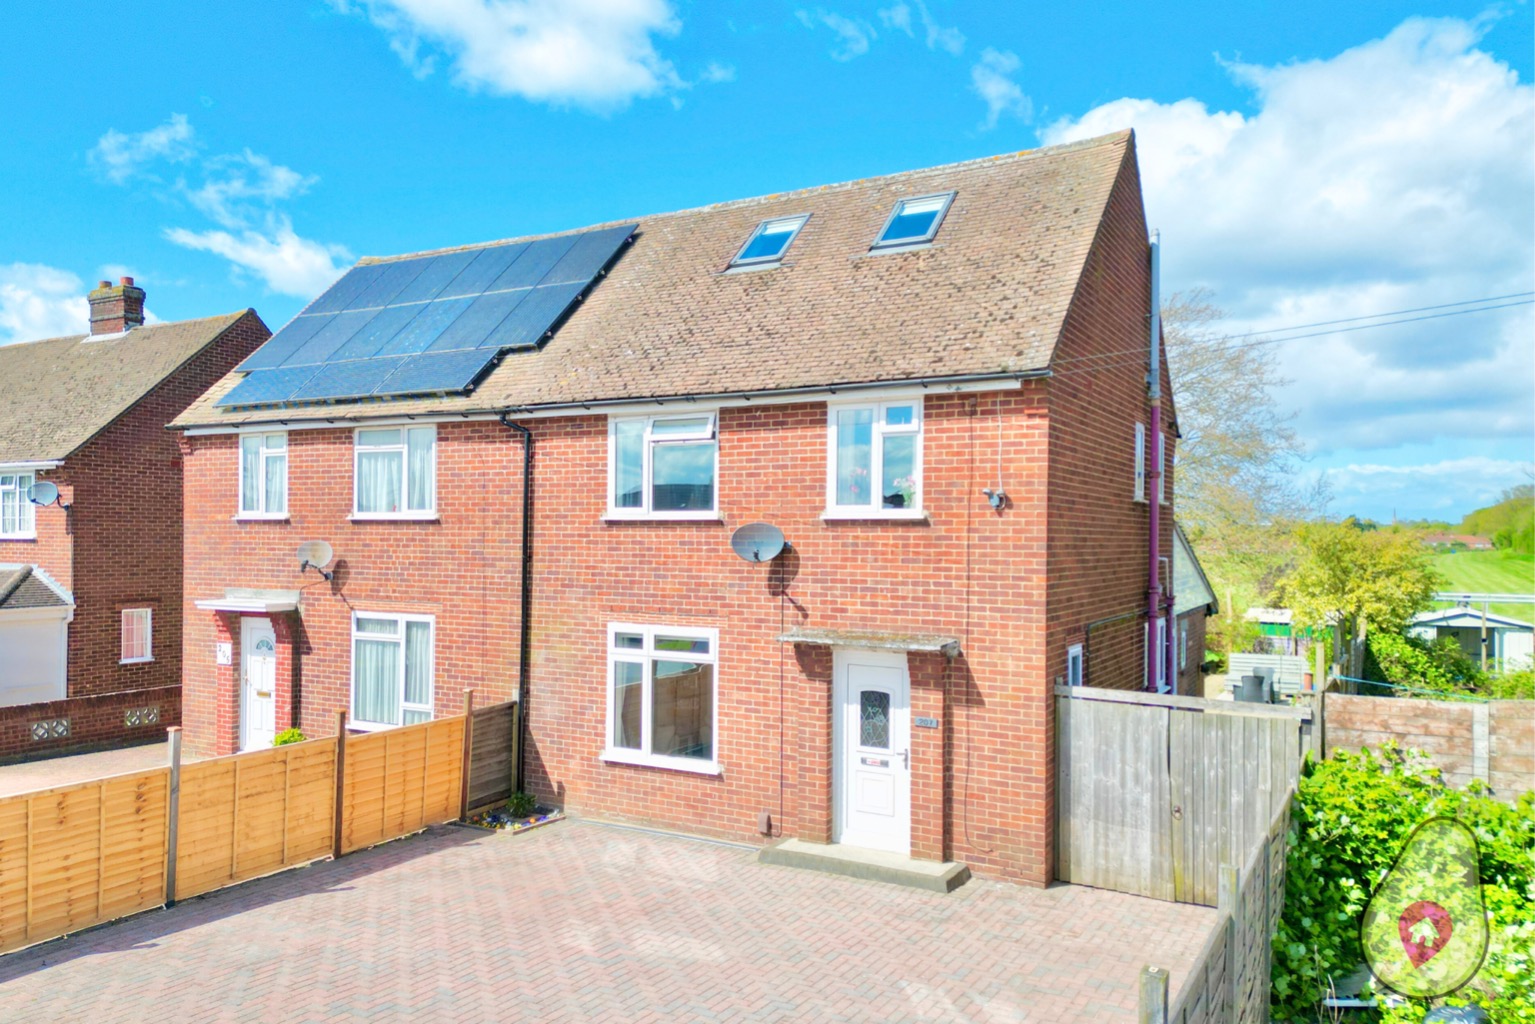 3 bed semi-detached house for sale in Hartland Road, Reading - Property Image 1